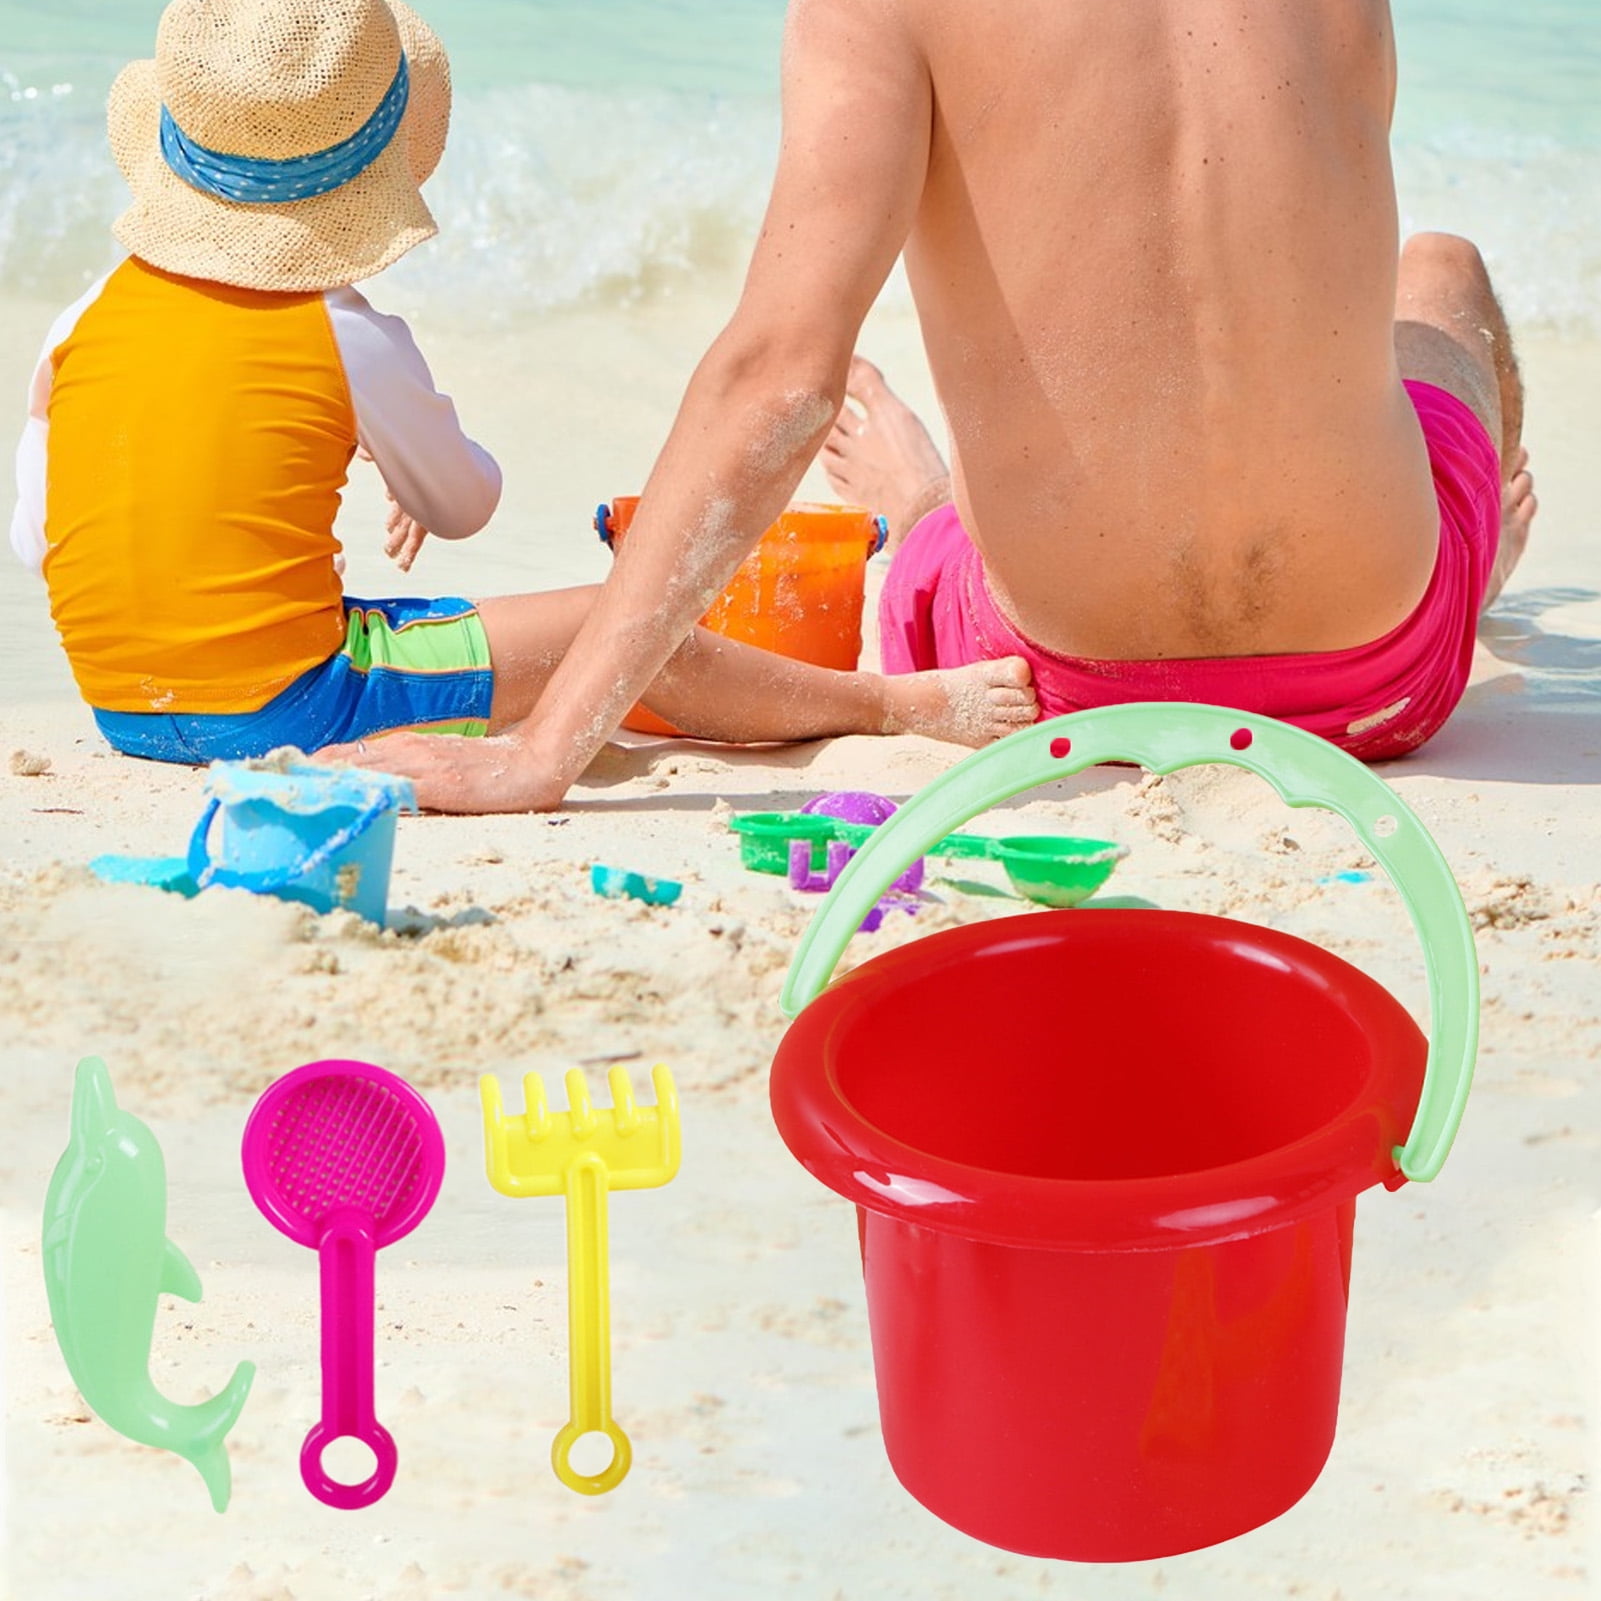 Small Mini Micro Beach Sand Plastic Pails Buckets Party Favors Gifts Candy  Box